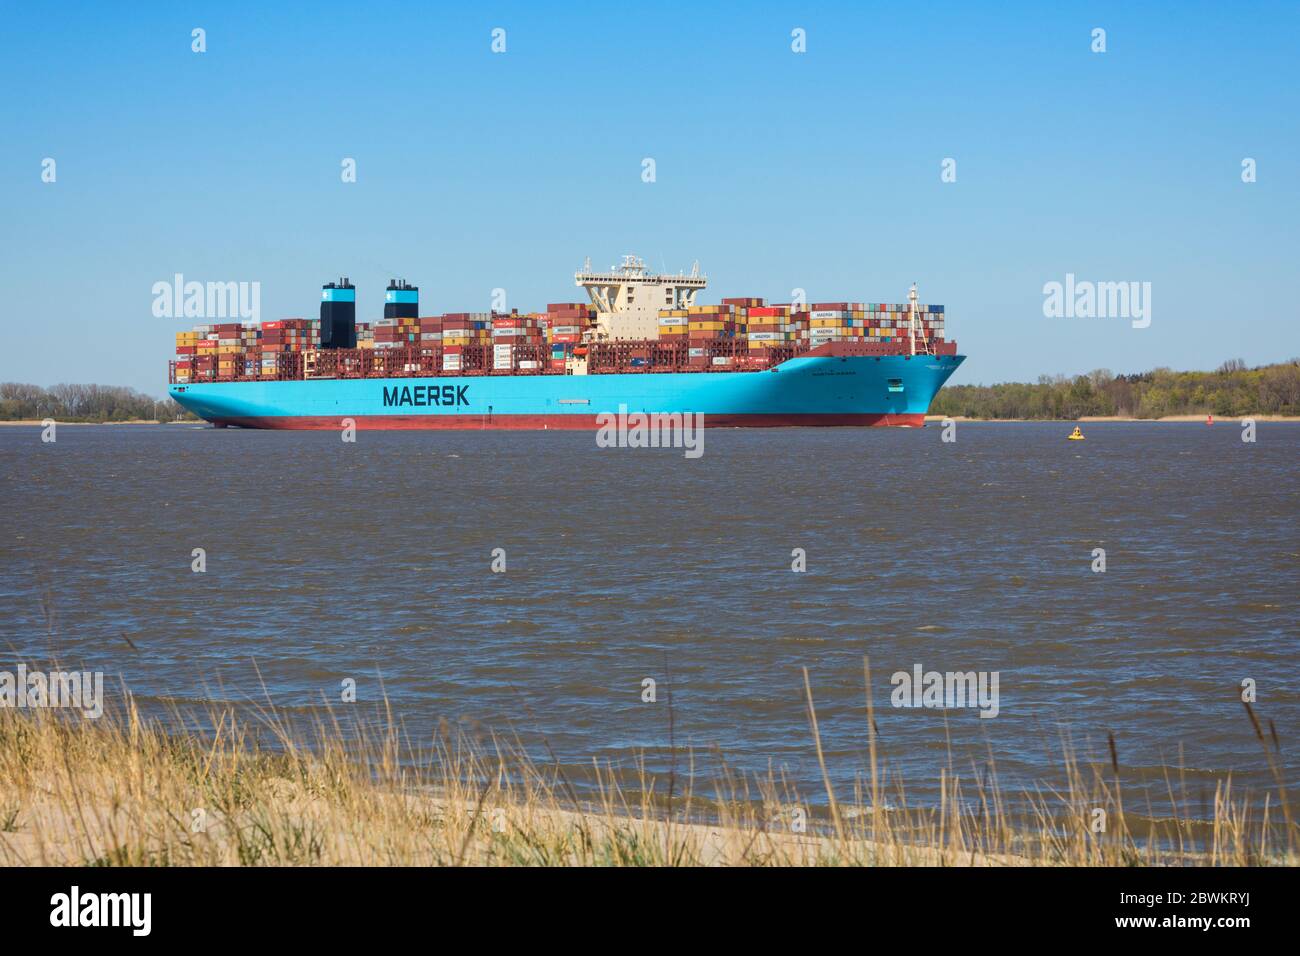 Stade, Germany - April 22, 2020: Container ship MORTEN MÆRSK on Elbe river heading to Hamburg. Beach and dune grass in foreground. Stock Photo